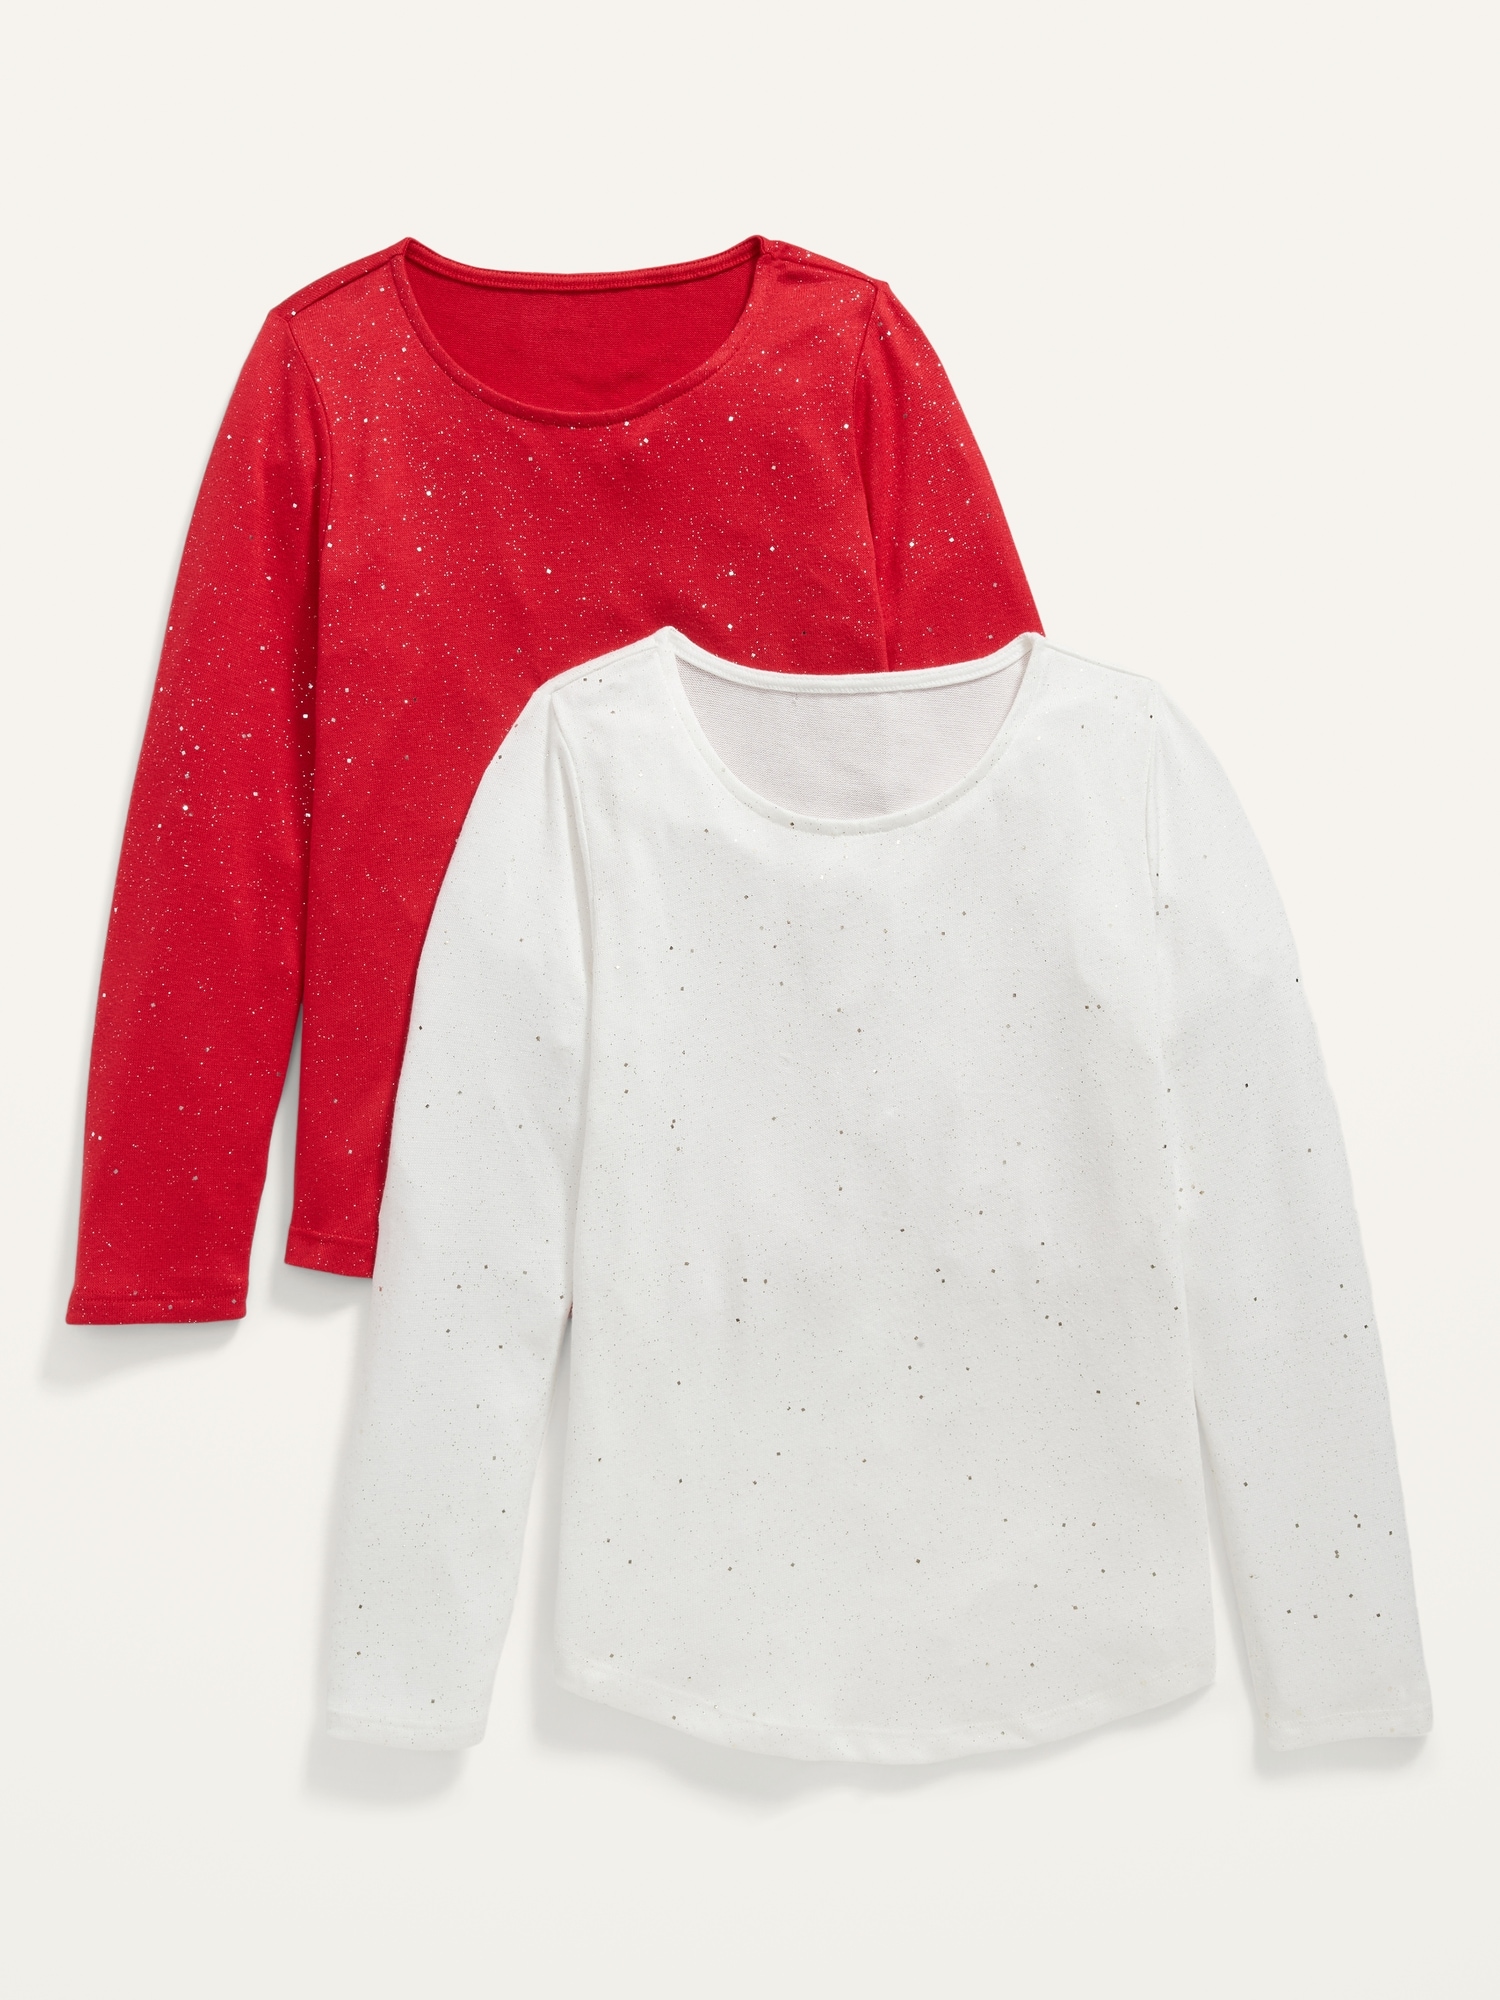 Cozy-Knit Long-Sleeve T-Shirt 2-Pack for Girls